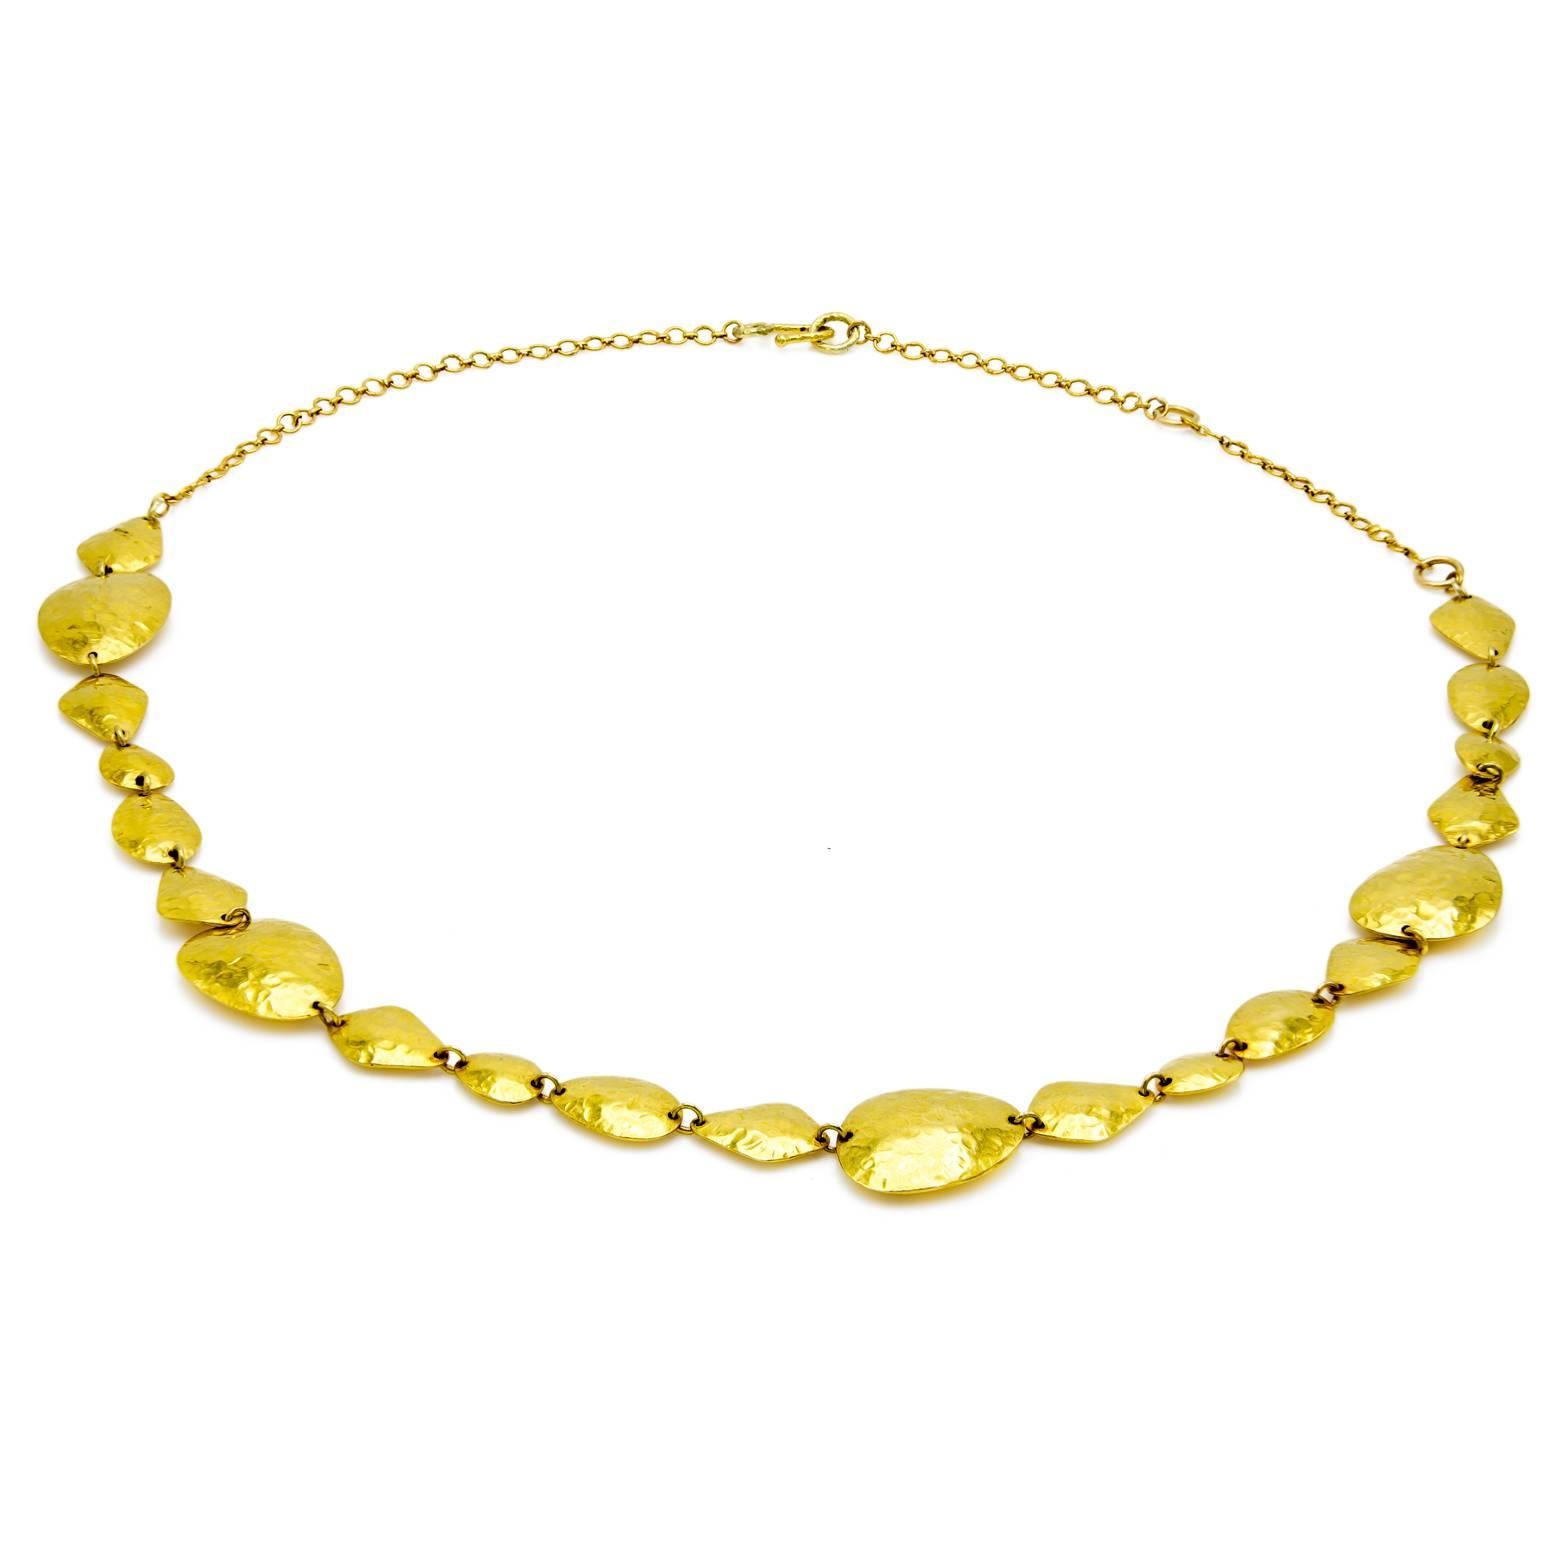 Modern Architectual Gold Necklace with Various Shapes of Hammered Gold Links